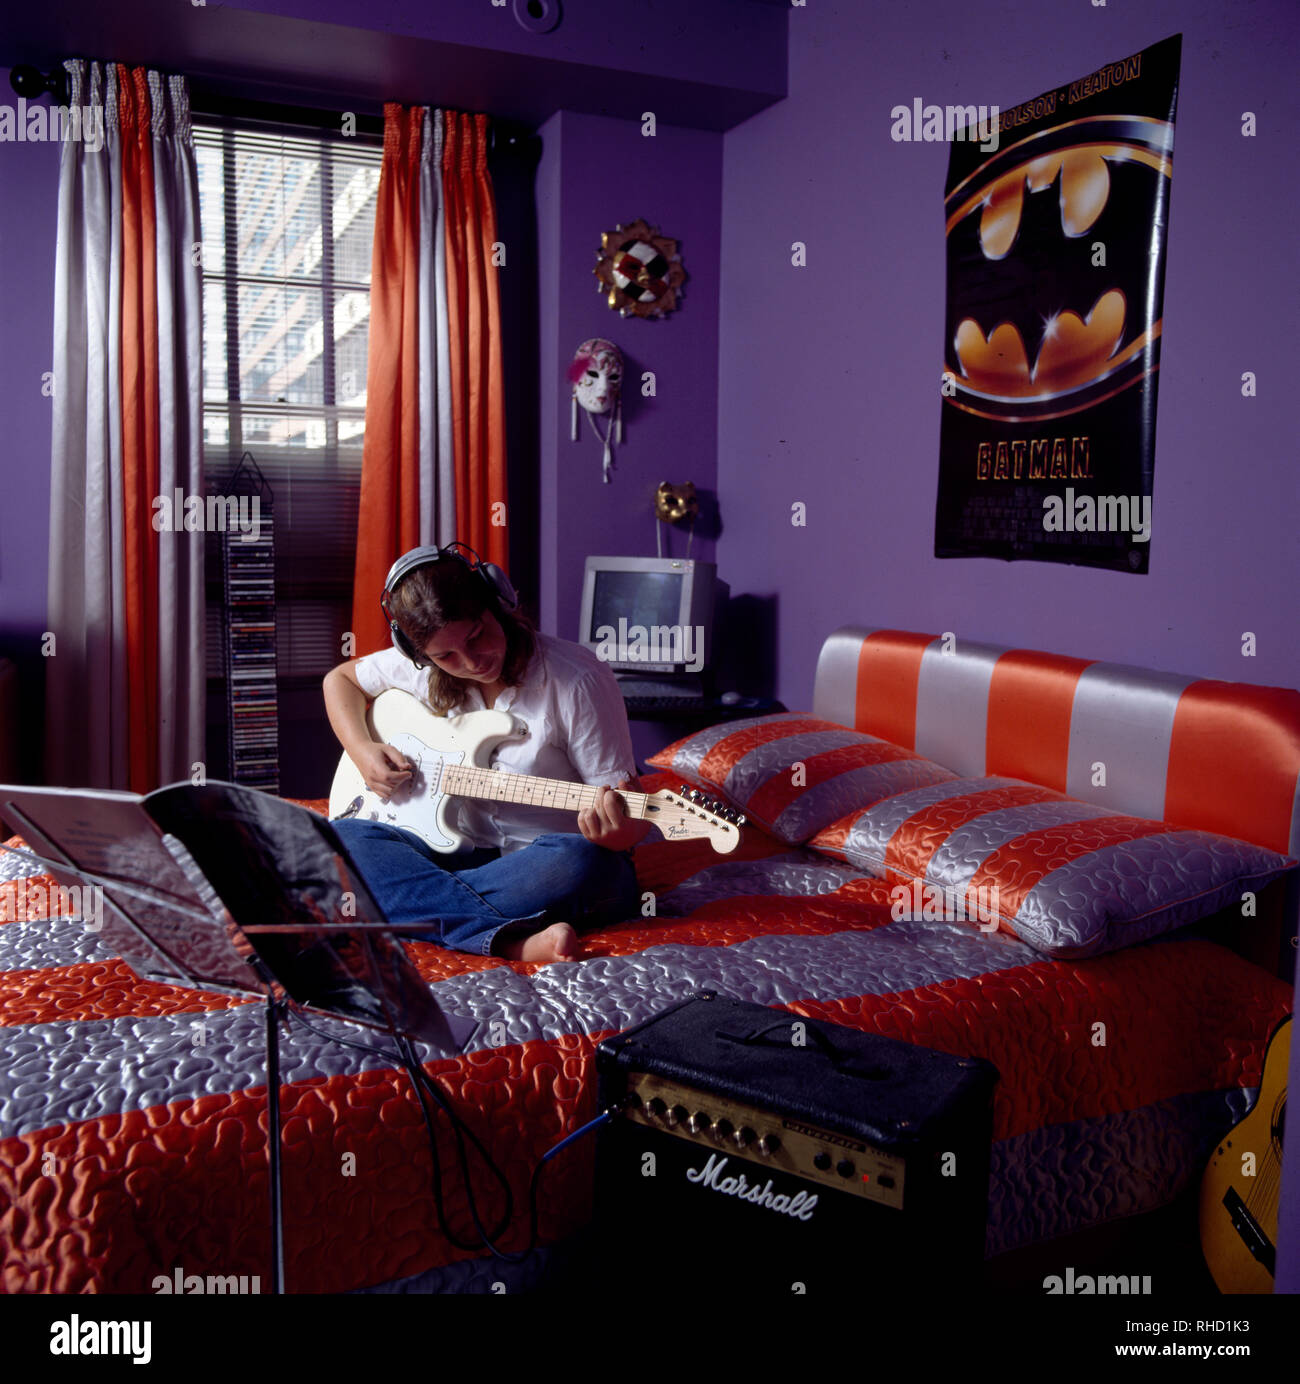 Teenager playing guitar in bedroom Stock Photo